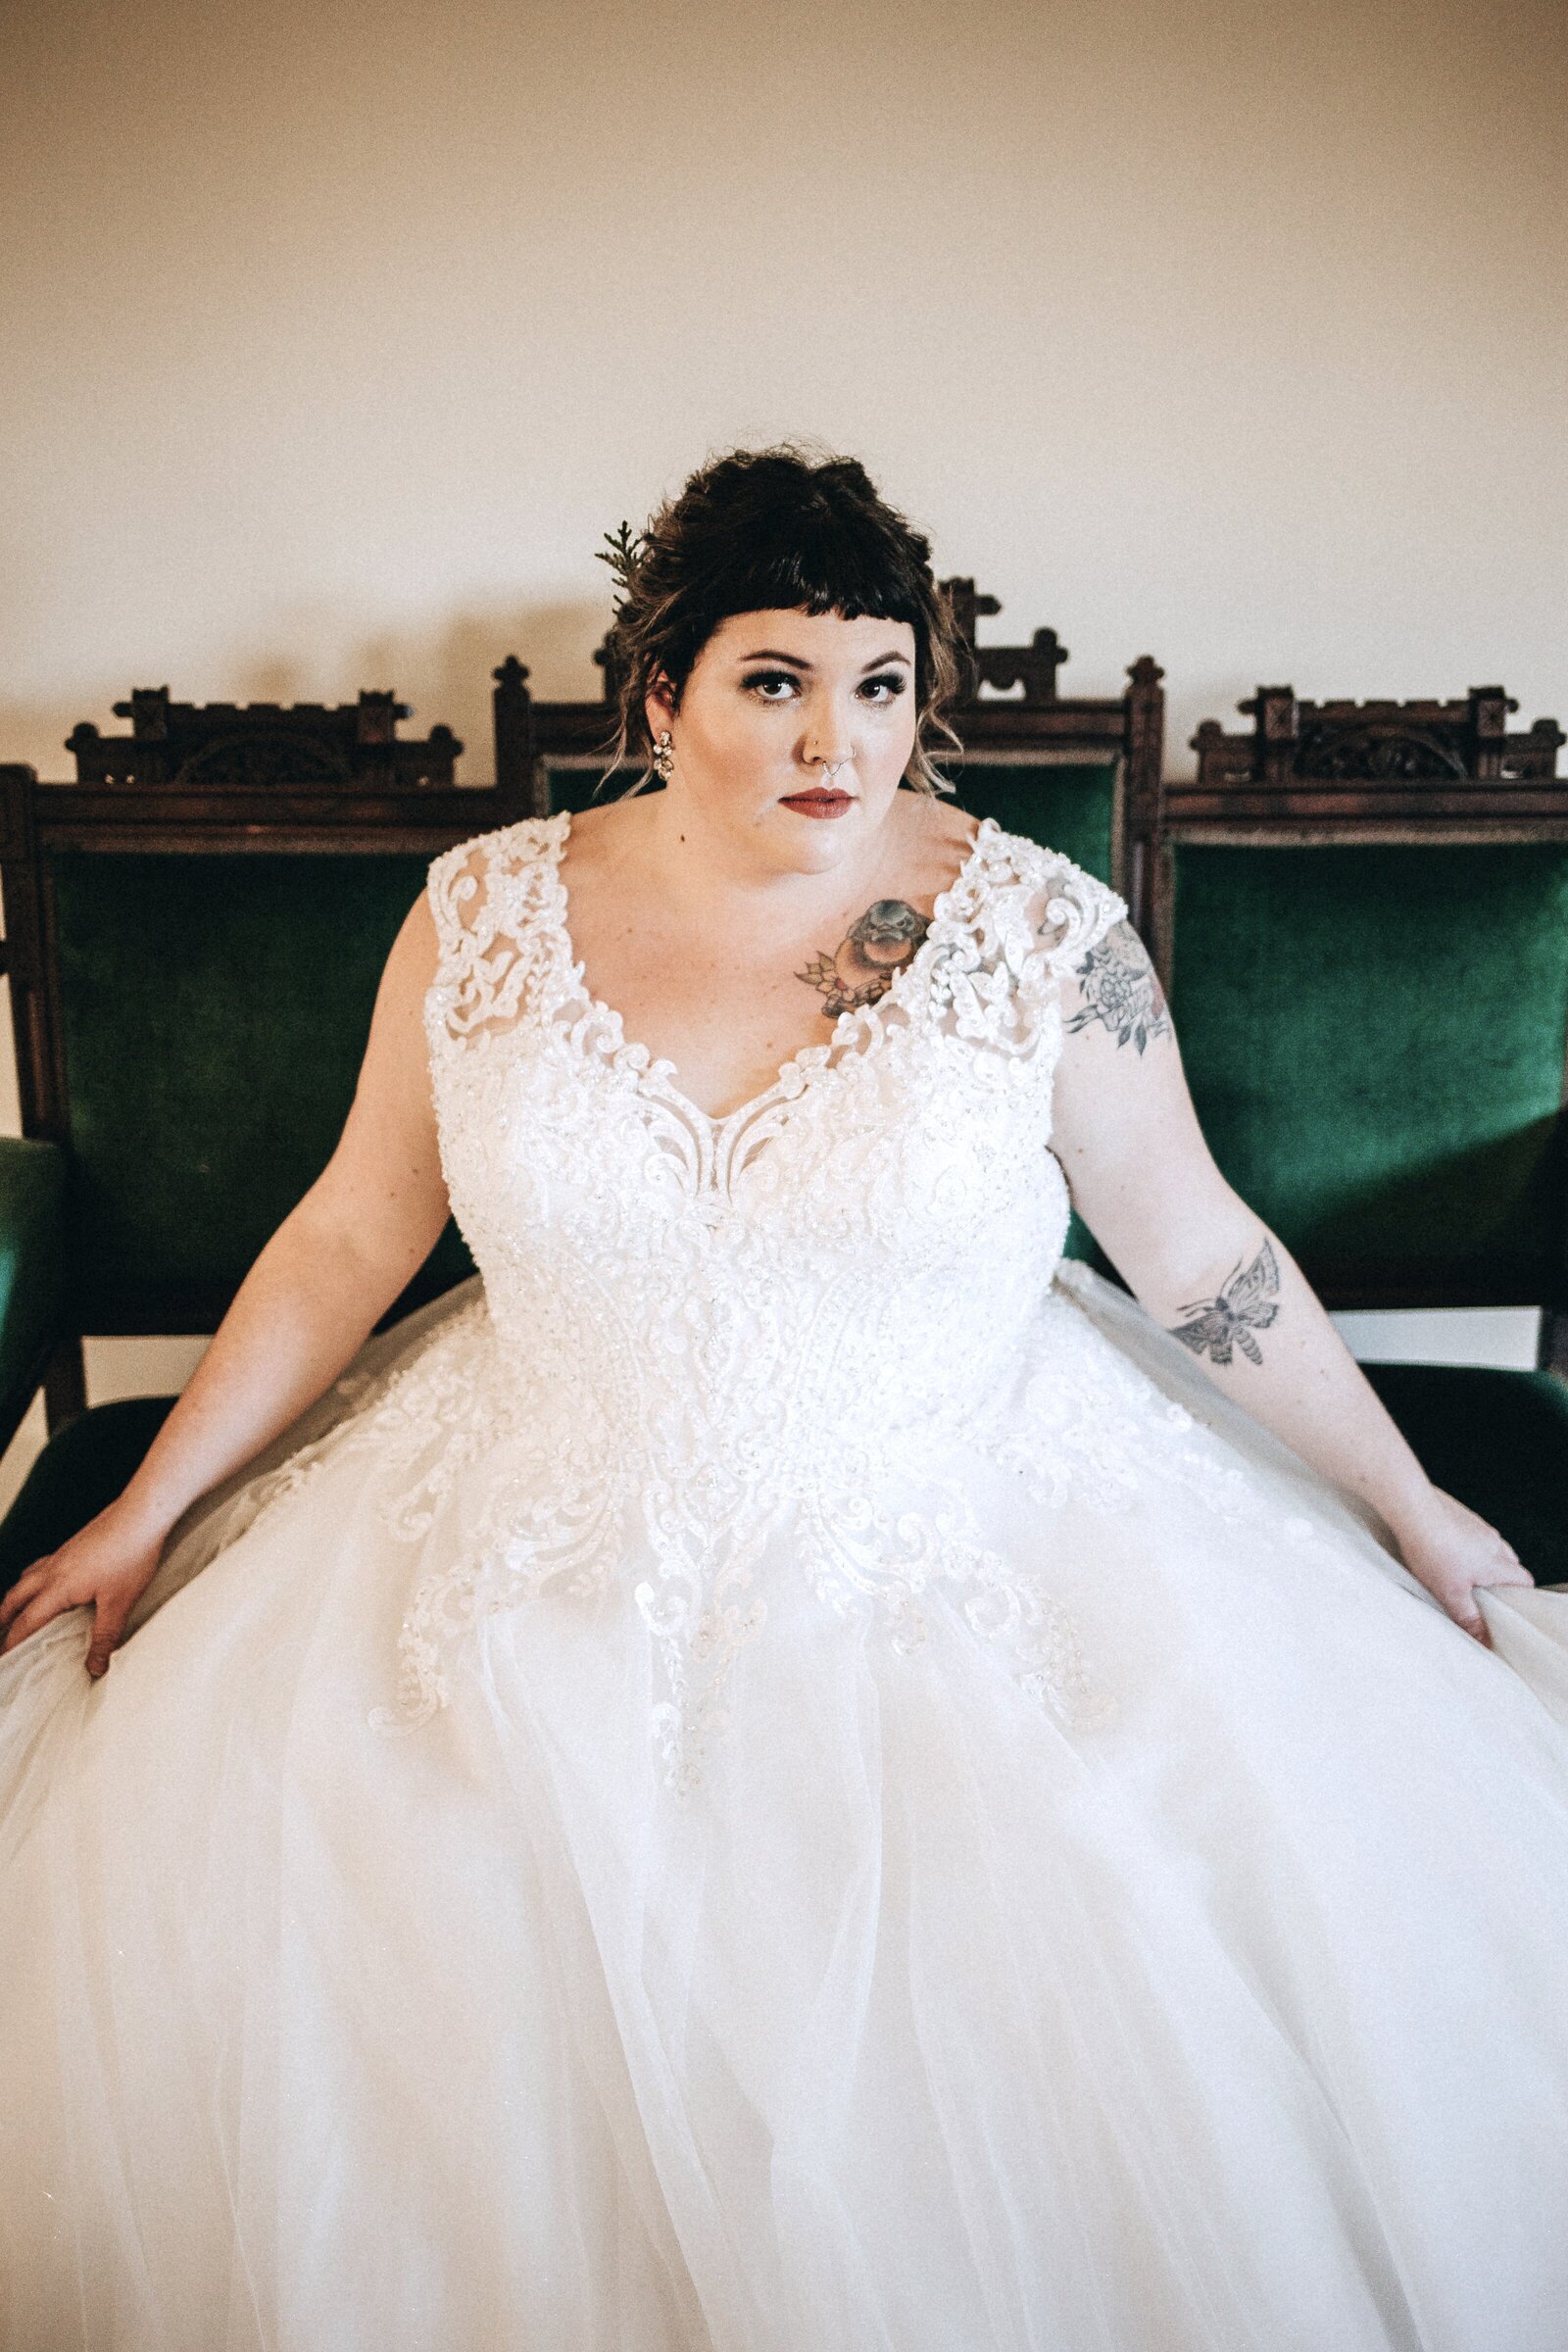 Bride looking at camera tattoo lace dress green velvet chairs